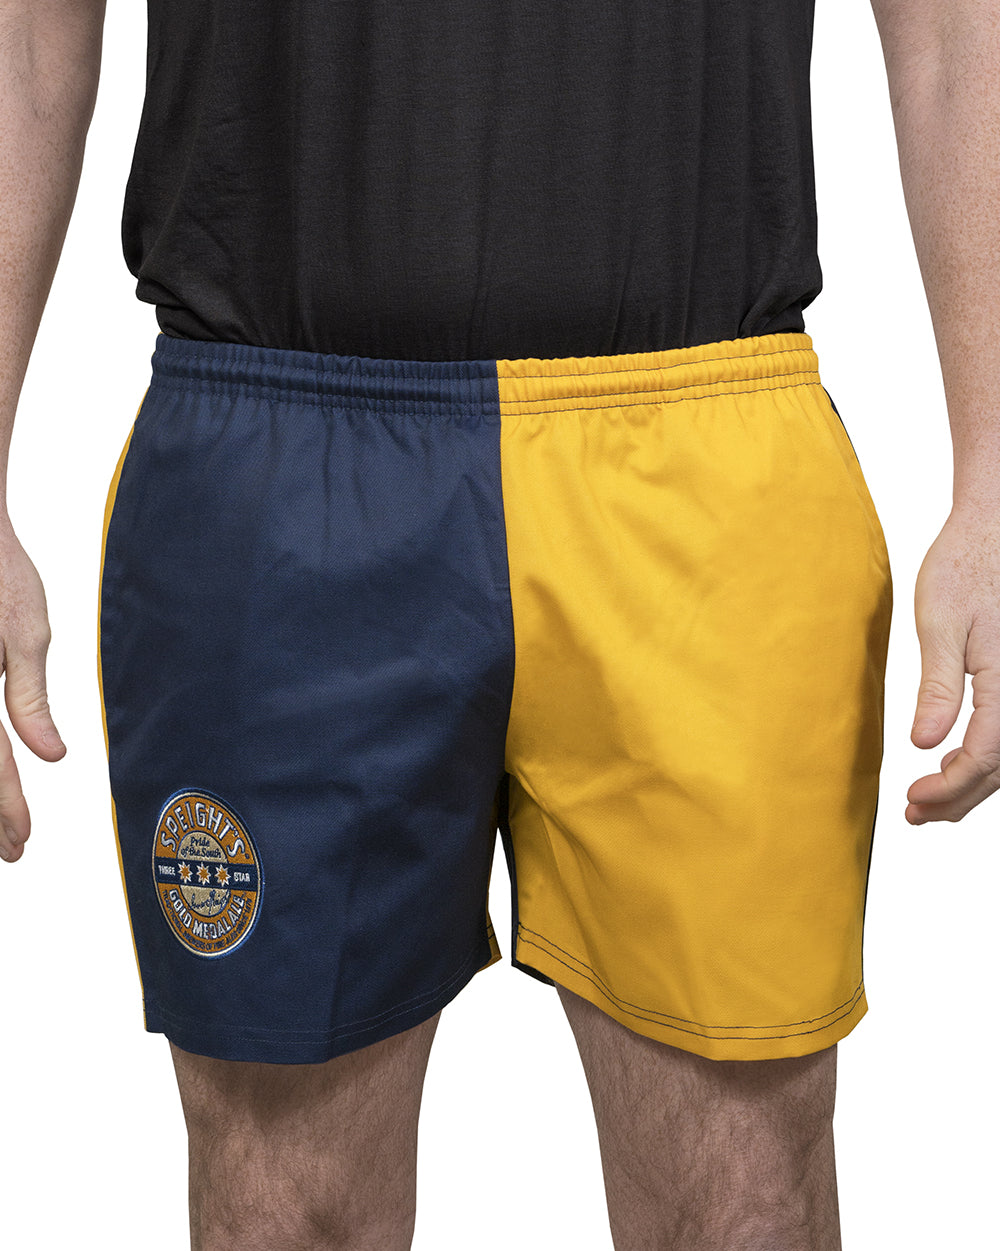 Speight's Retro Harlequin Rugby Shorts -  Beer Gear Apparel & Merchandise - speights - lion red - vb - tokyo dry merch